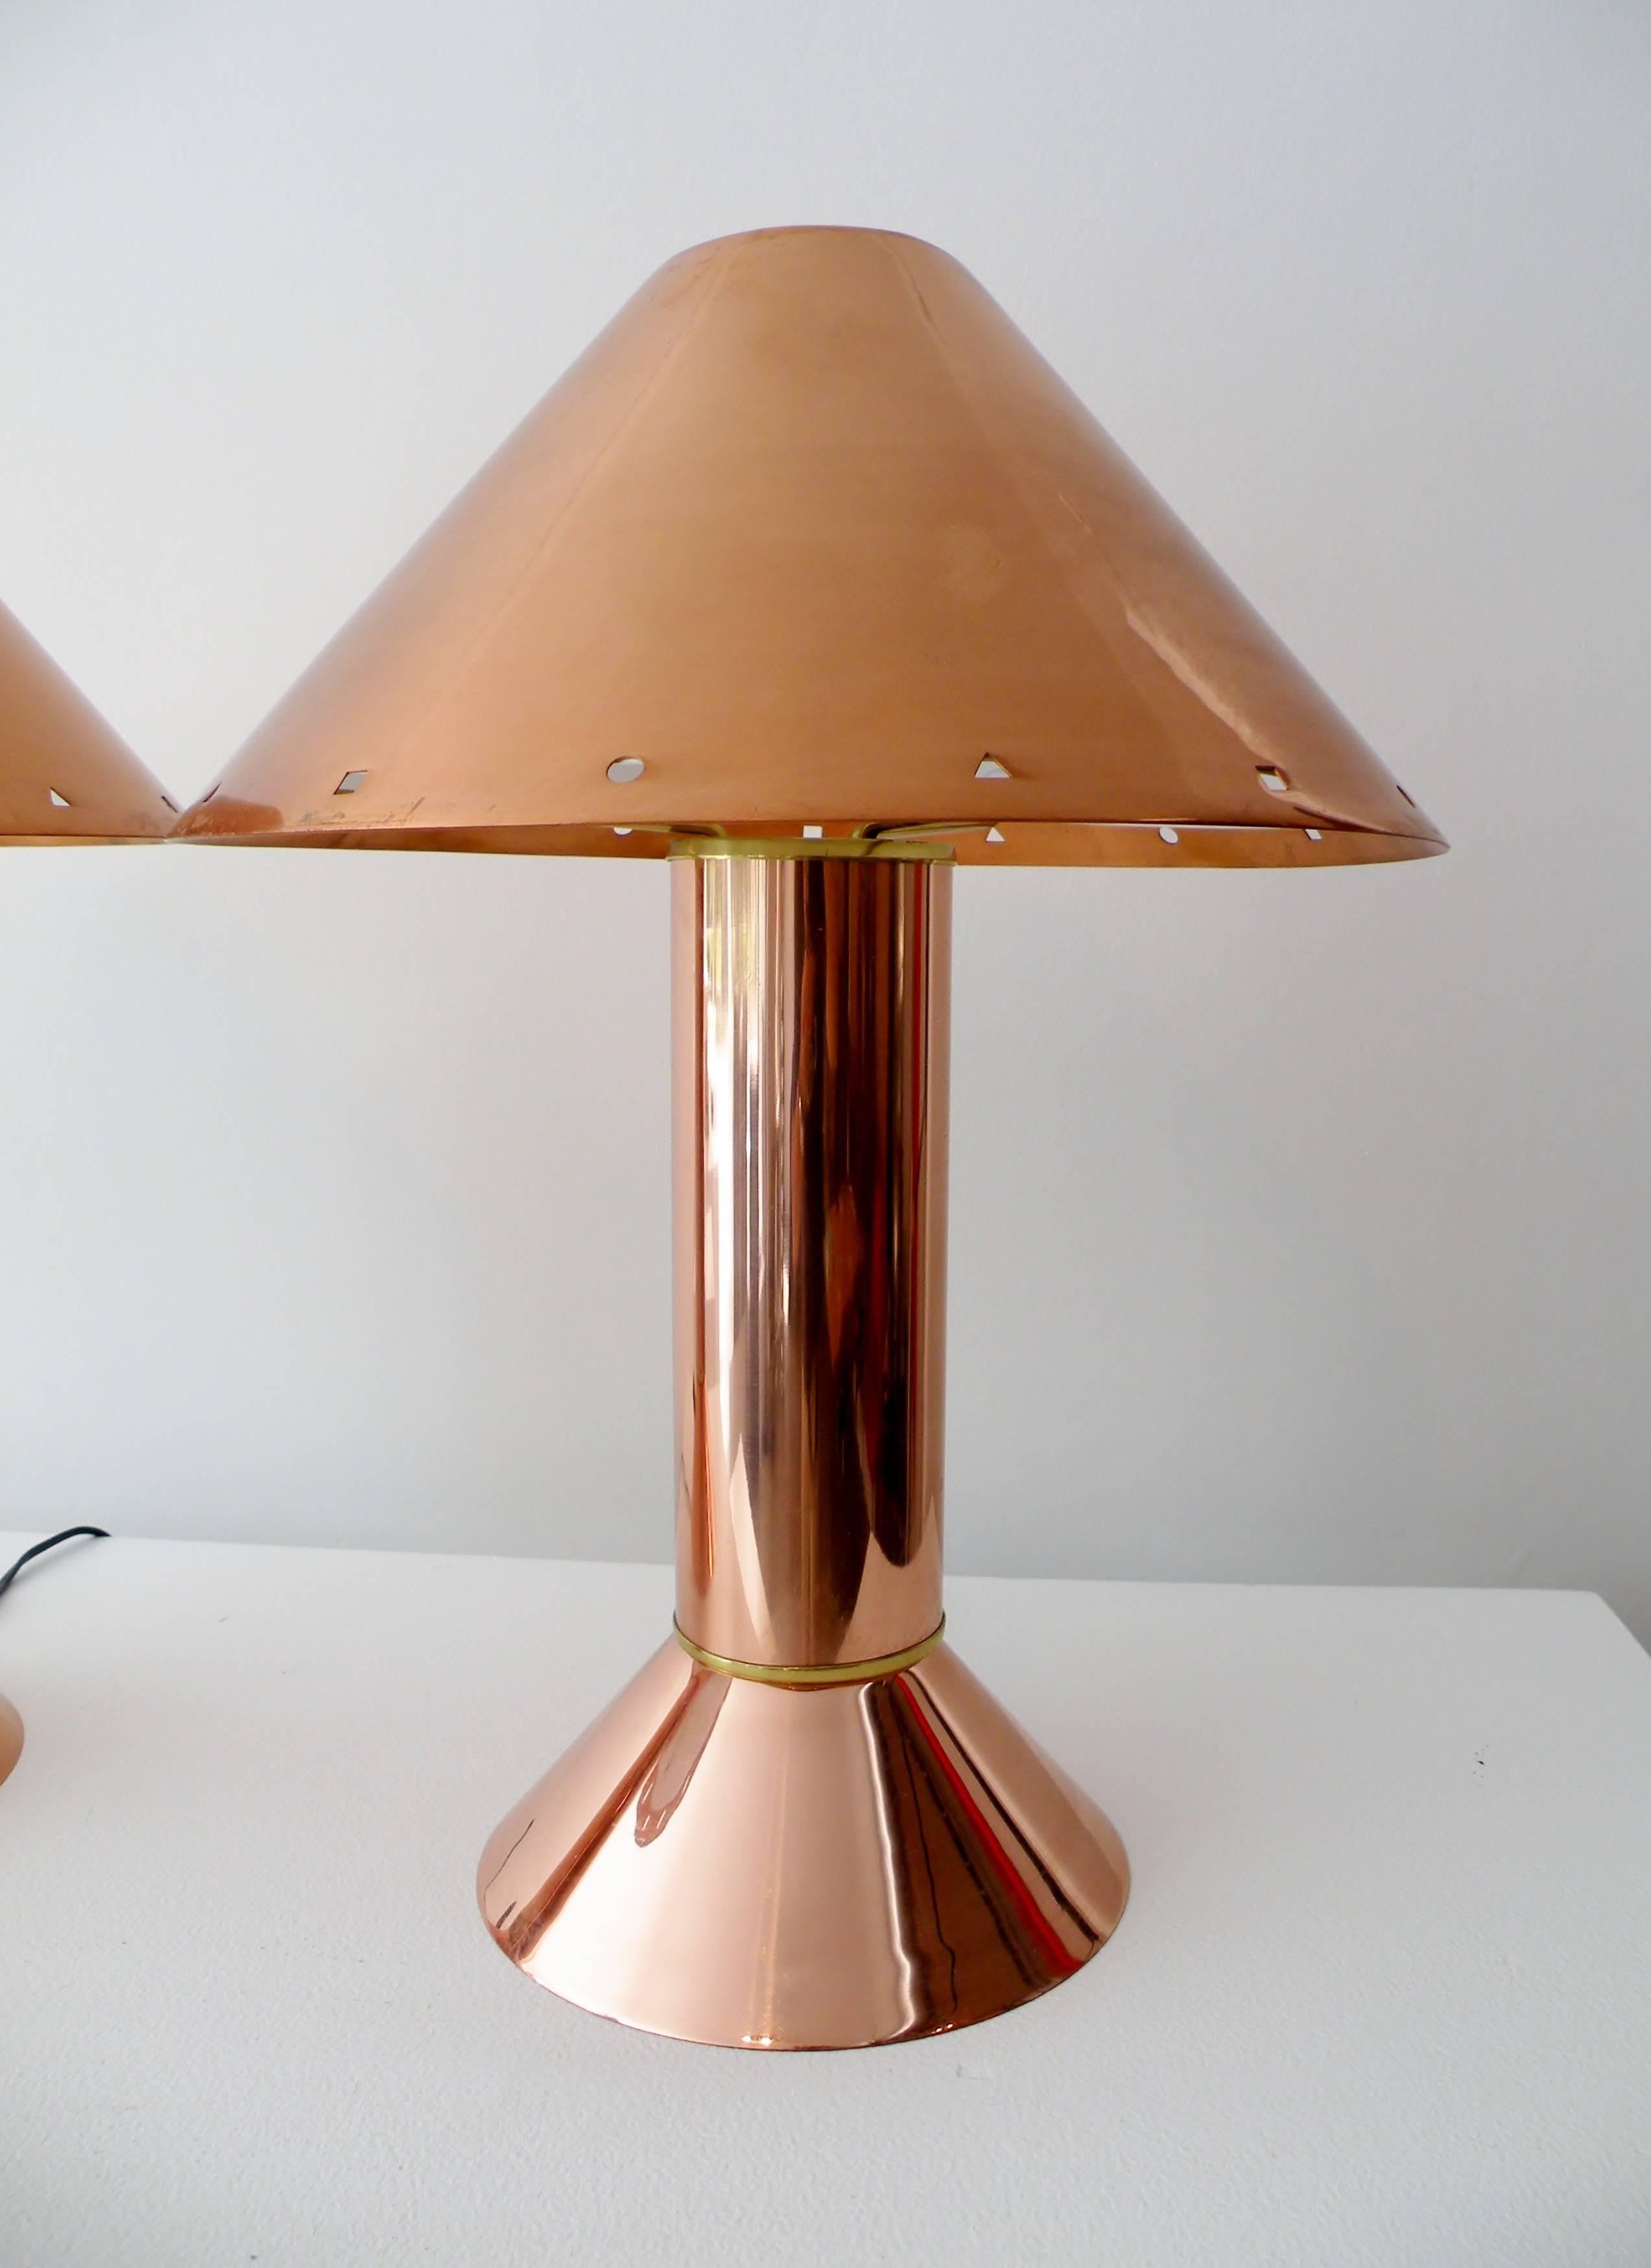 Iconic pair of 1980s Postmodernist Ron Rezek of California table or desk lamps. Classic form and motif of the era in timeless polished copper. Overall height 18